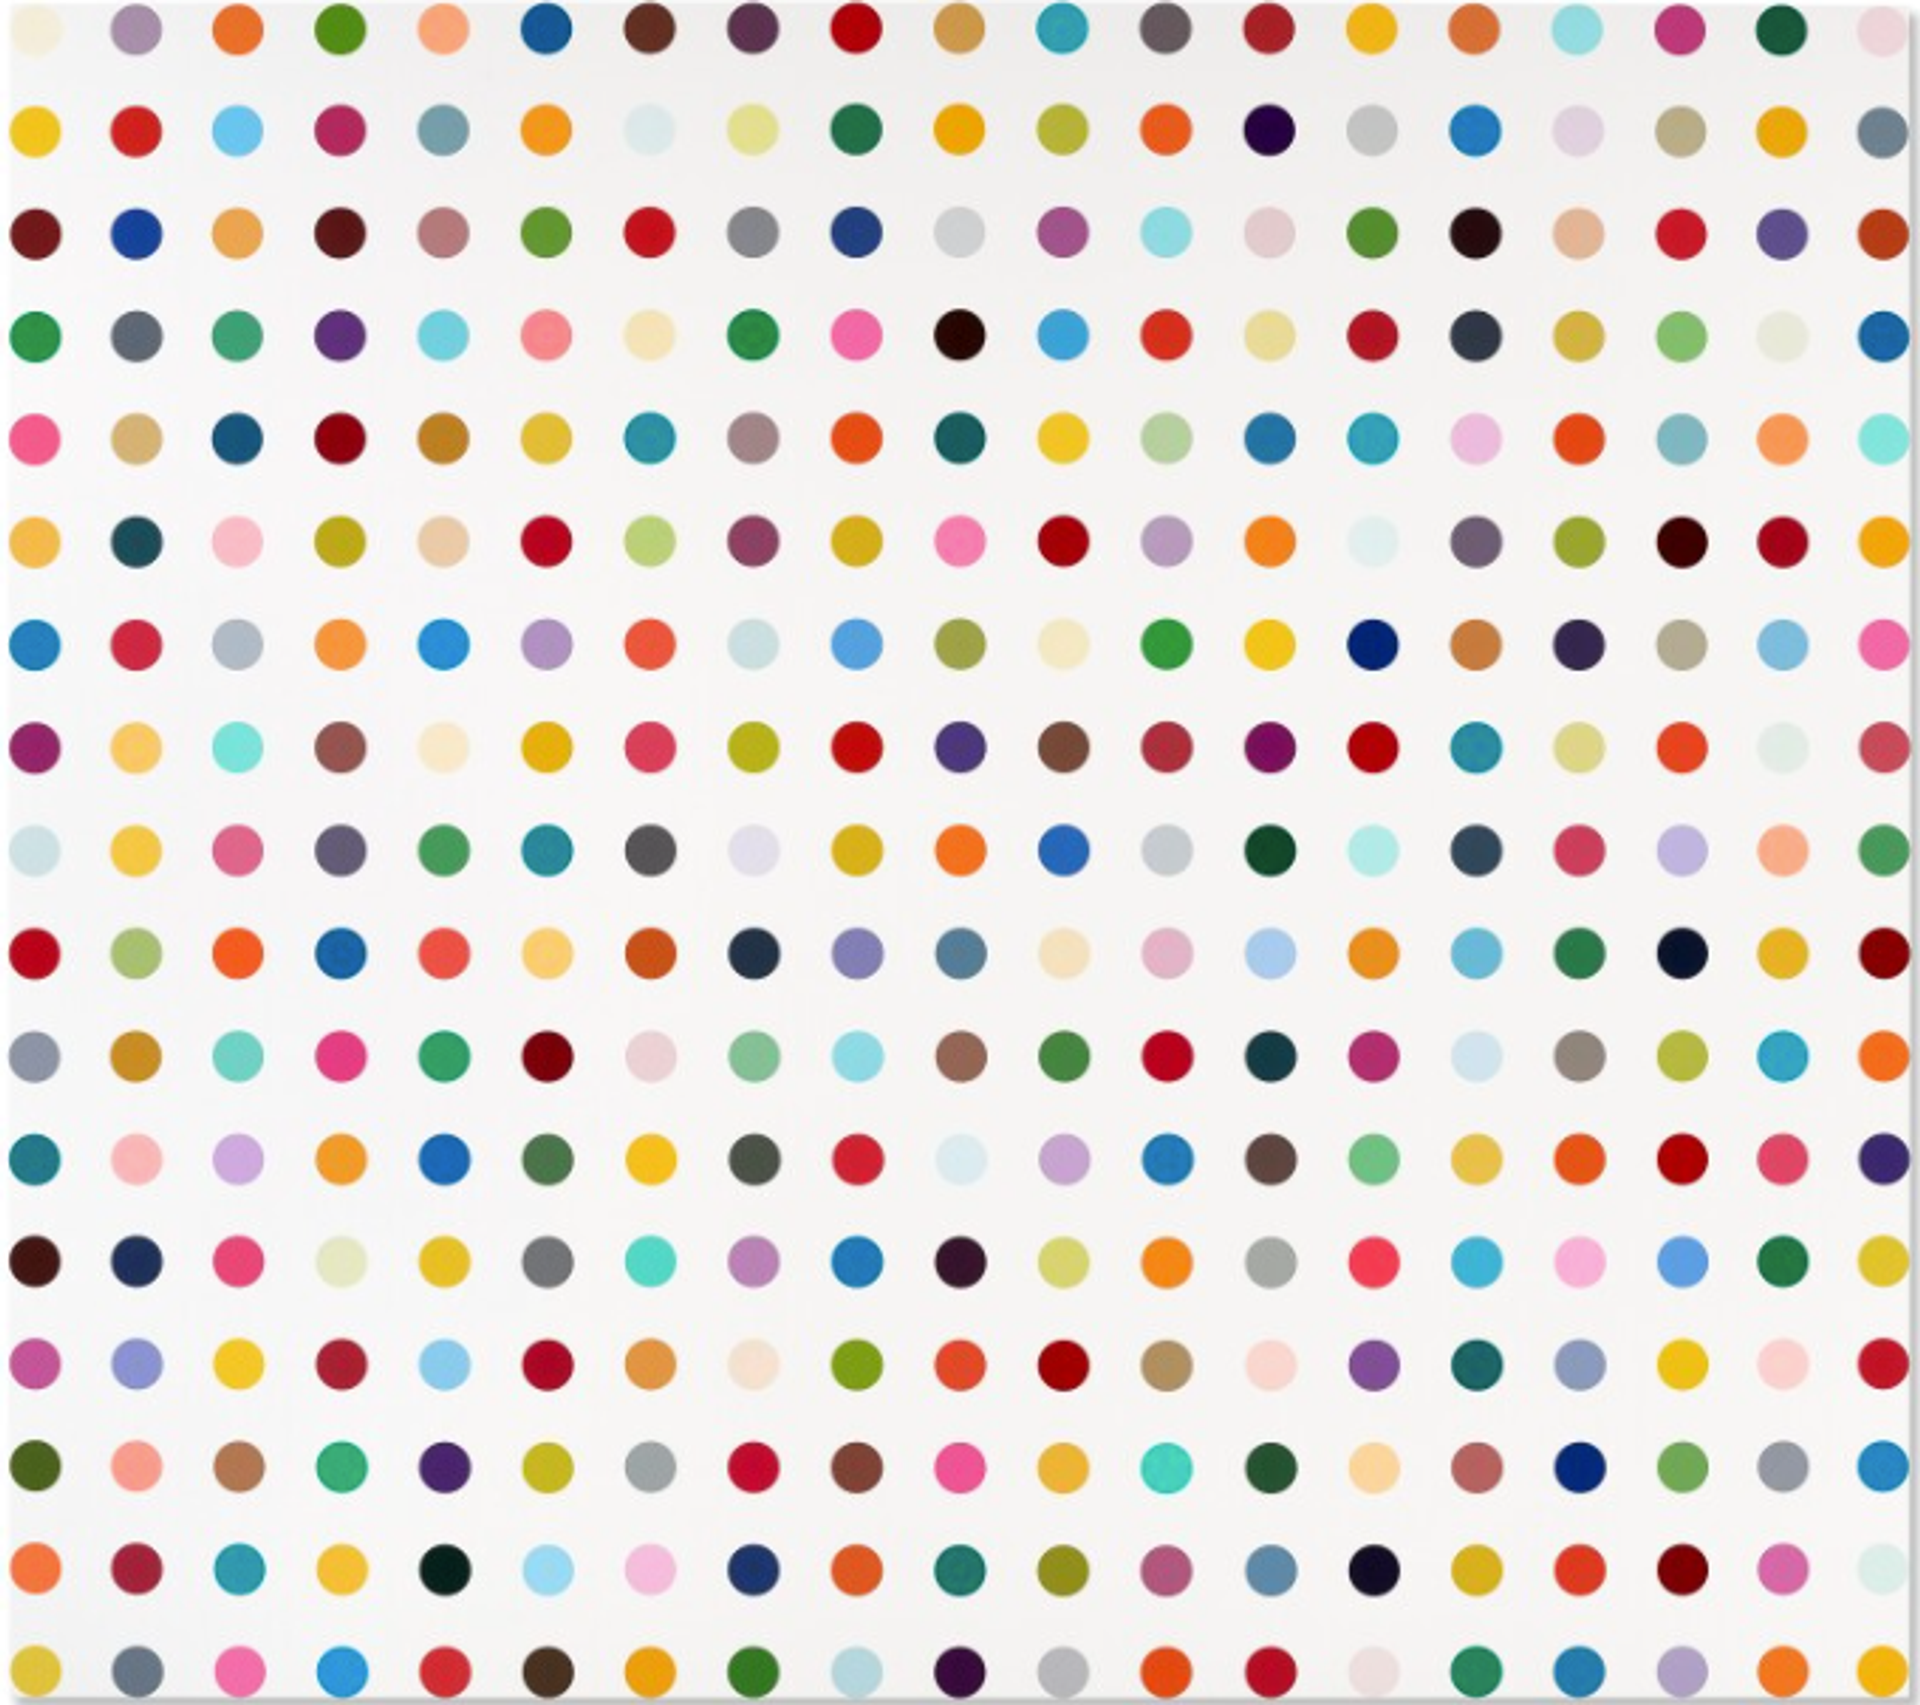 Pyrene by Damien Hirst - Sotheby's 2024 